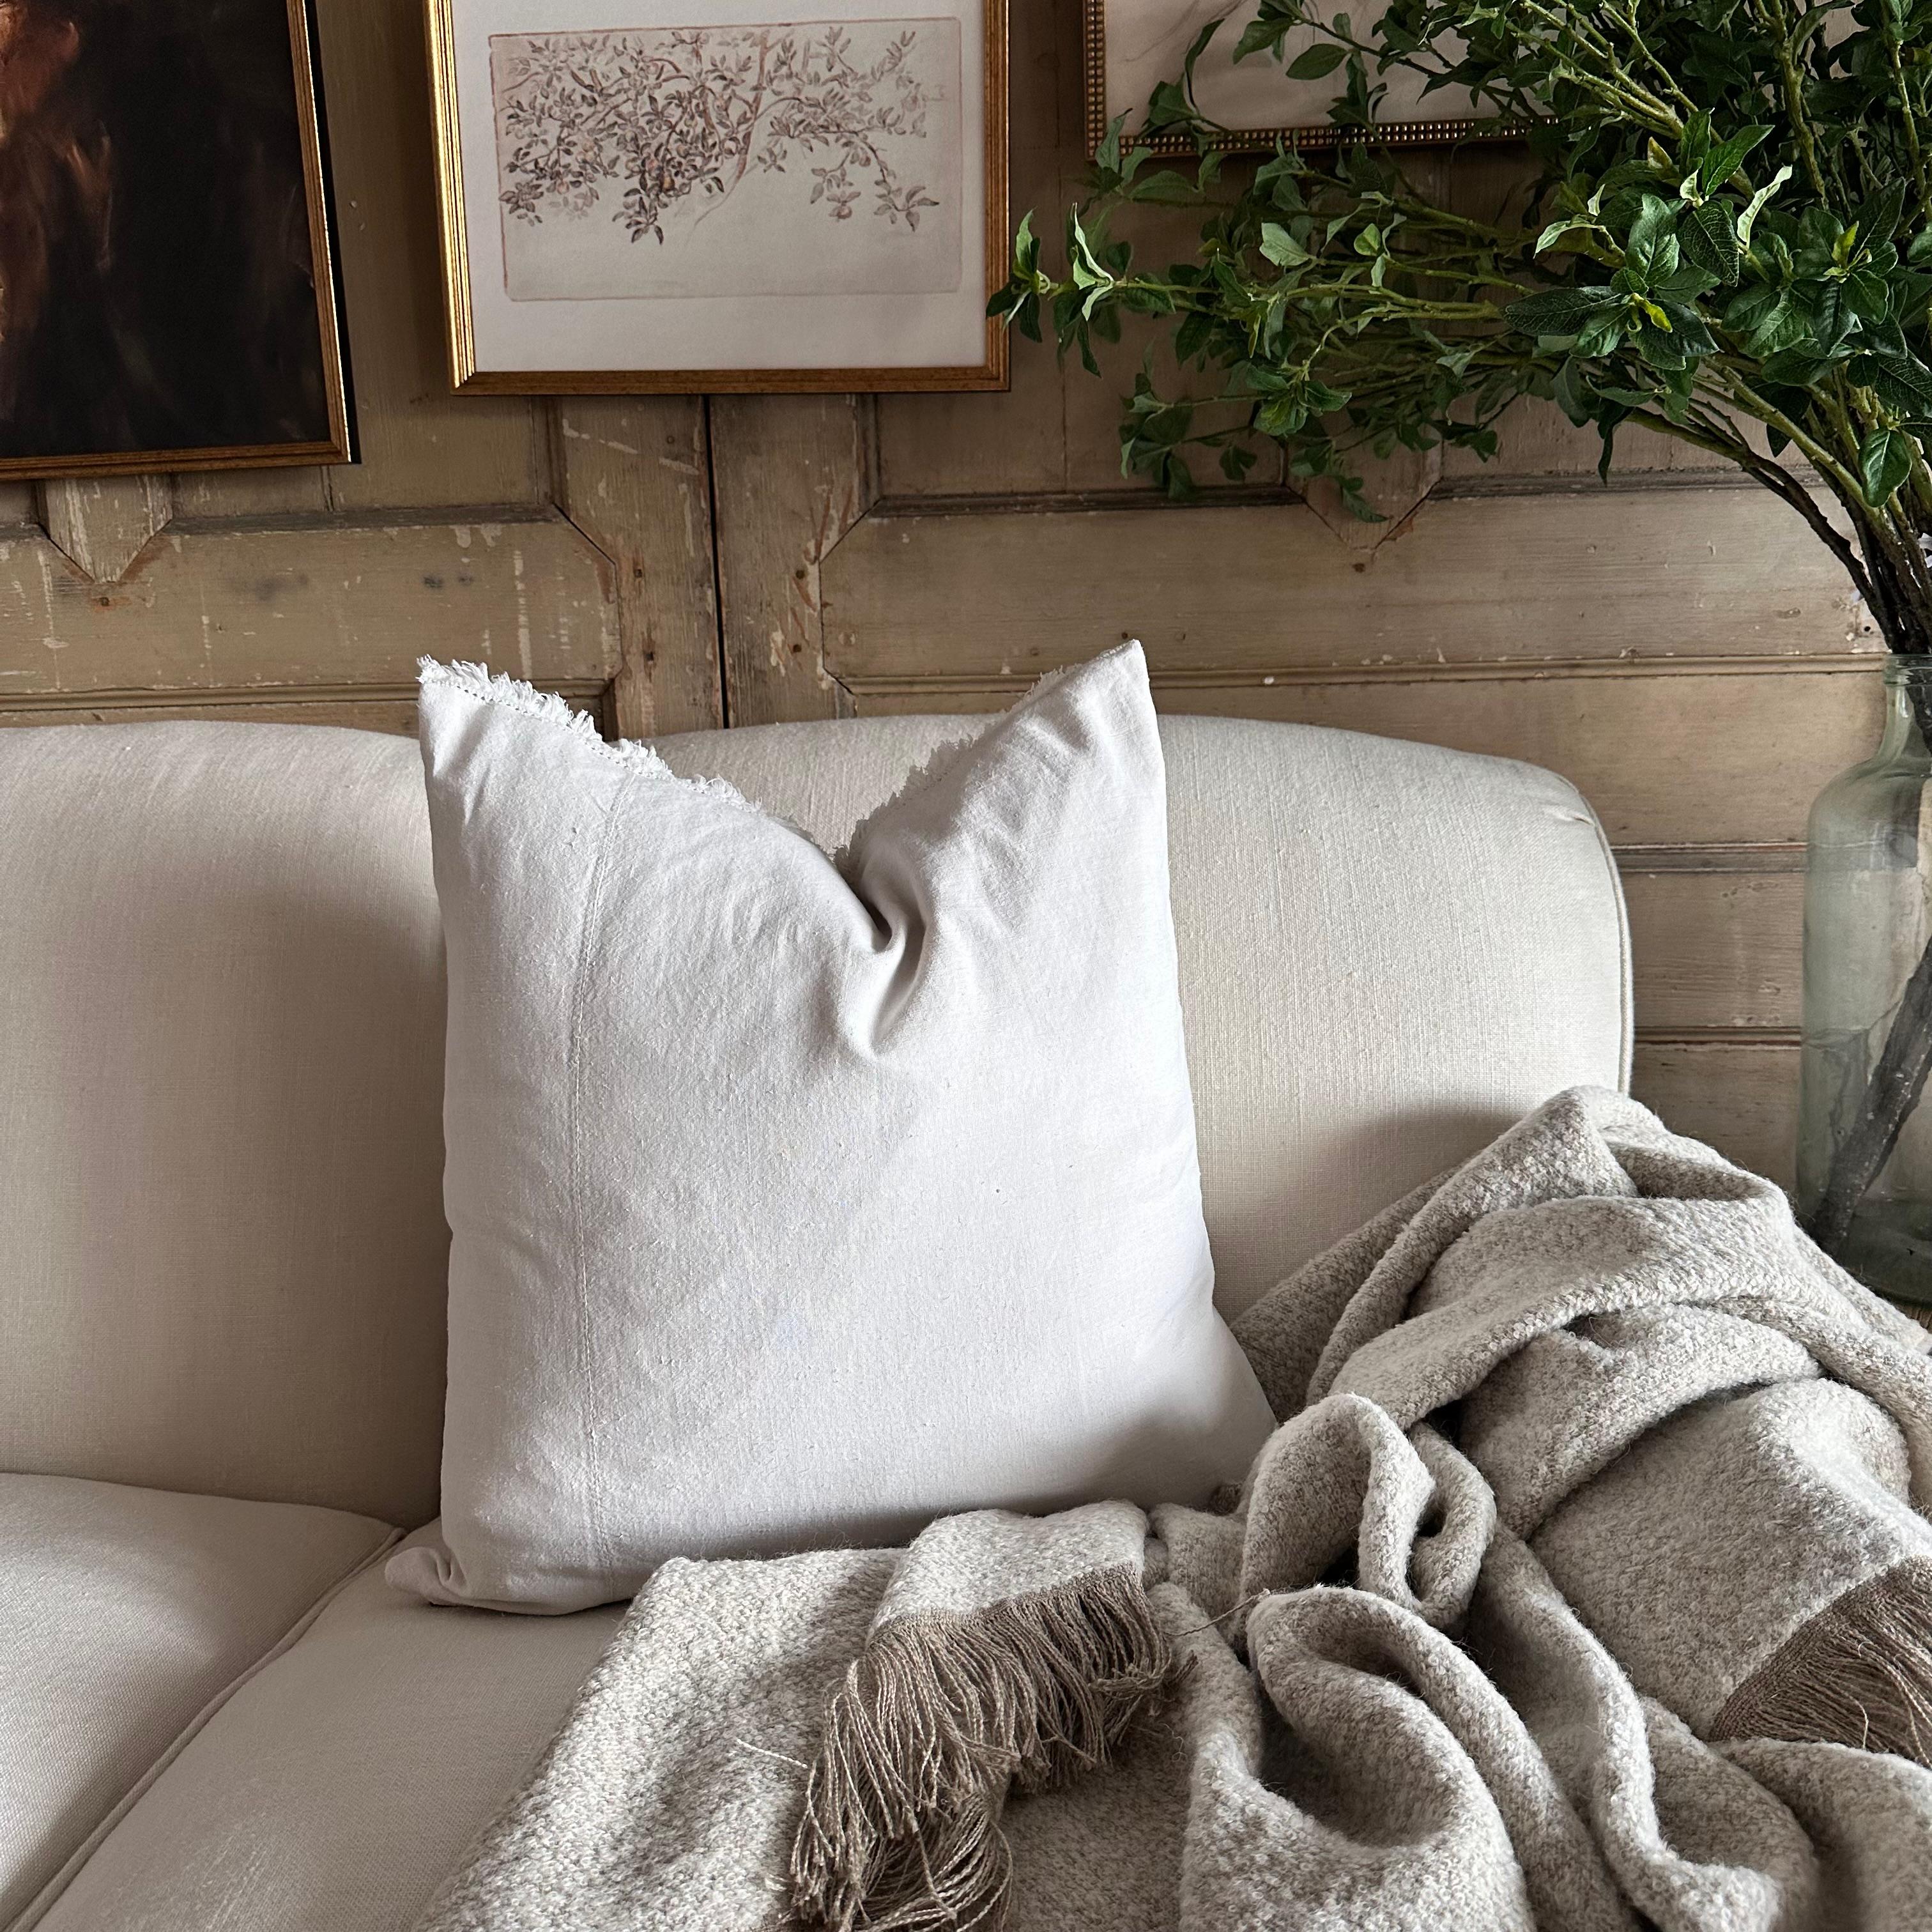 Antique French White Grain Linen Pillows with Insert In Good Condition For Sale In Brea, CA